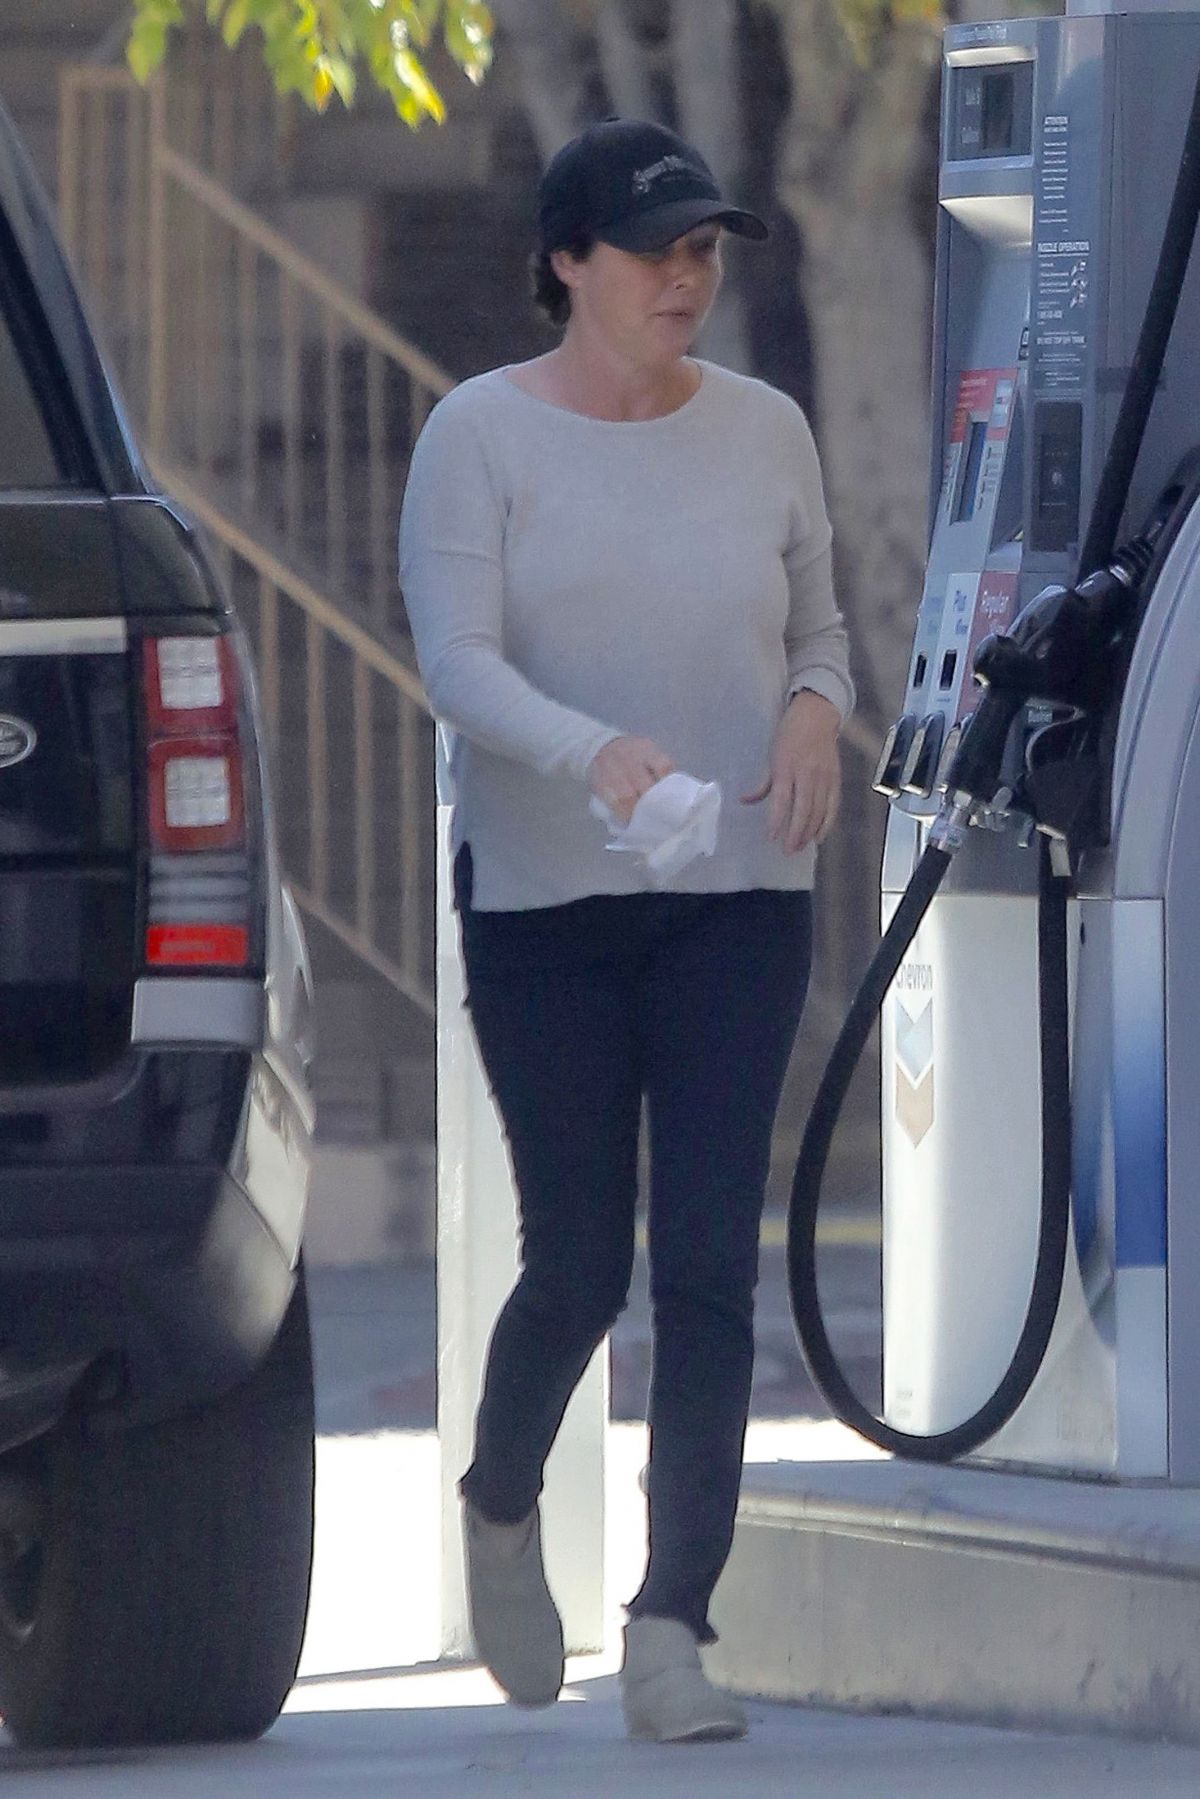 SHANNEN DOHERTY at a Gas Station in Los Angeles 05/22/2017 - HawtCelebs